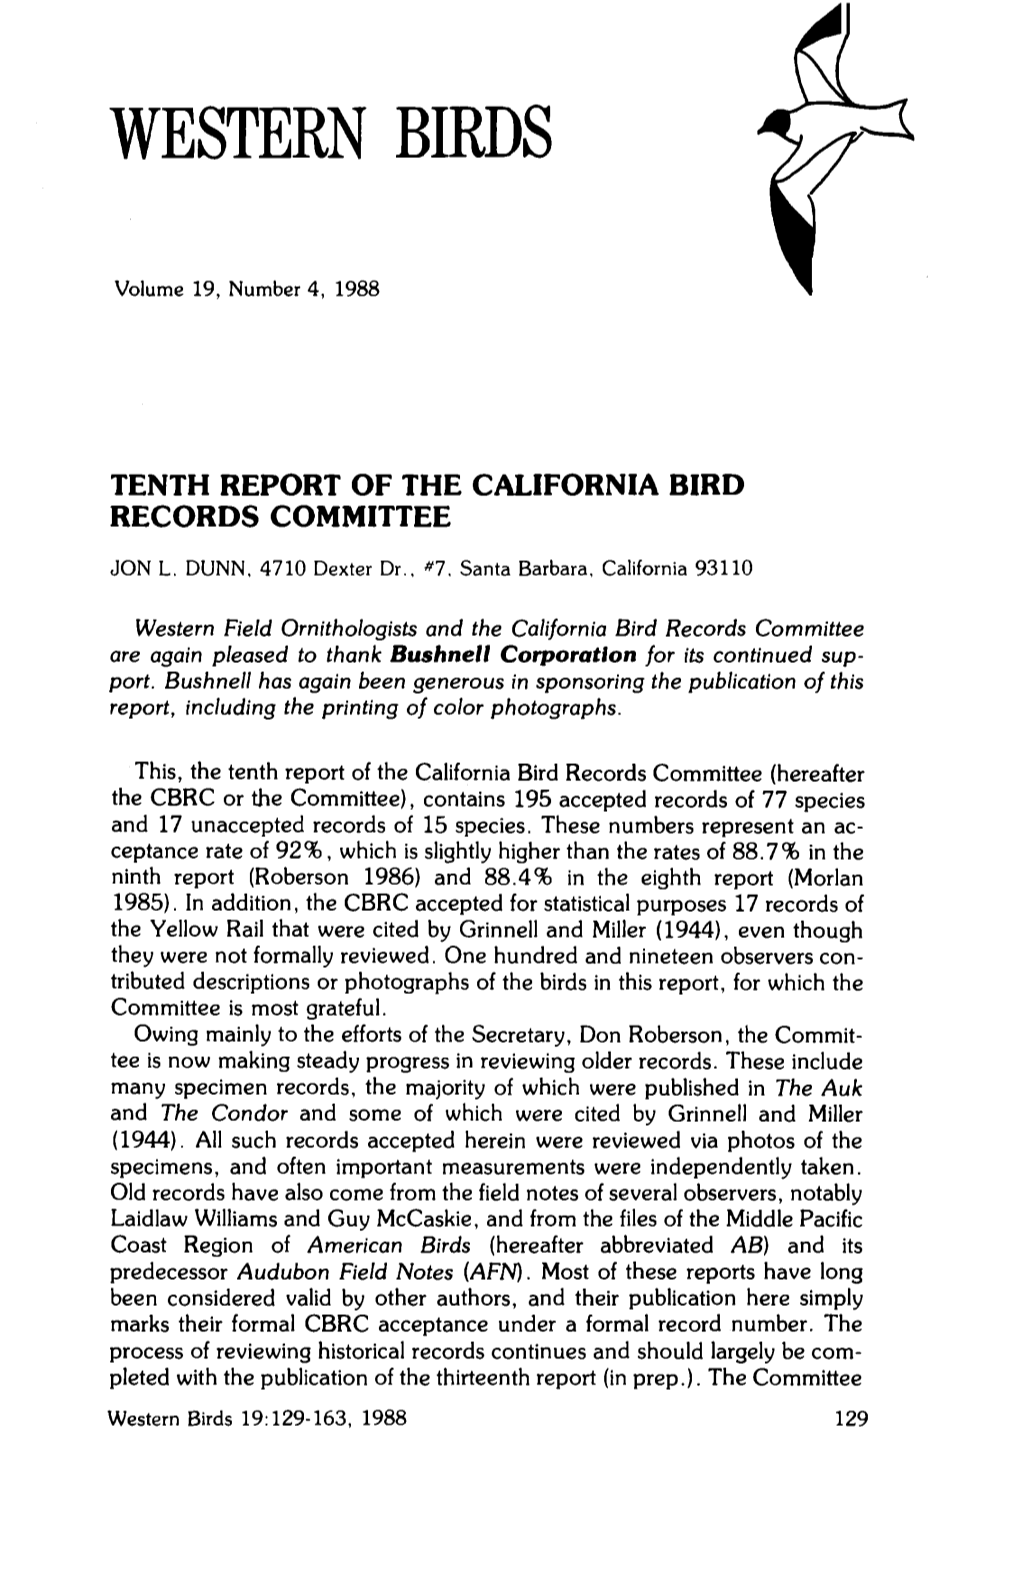 Tenth Report of the California Bird Records Committee